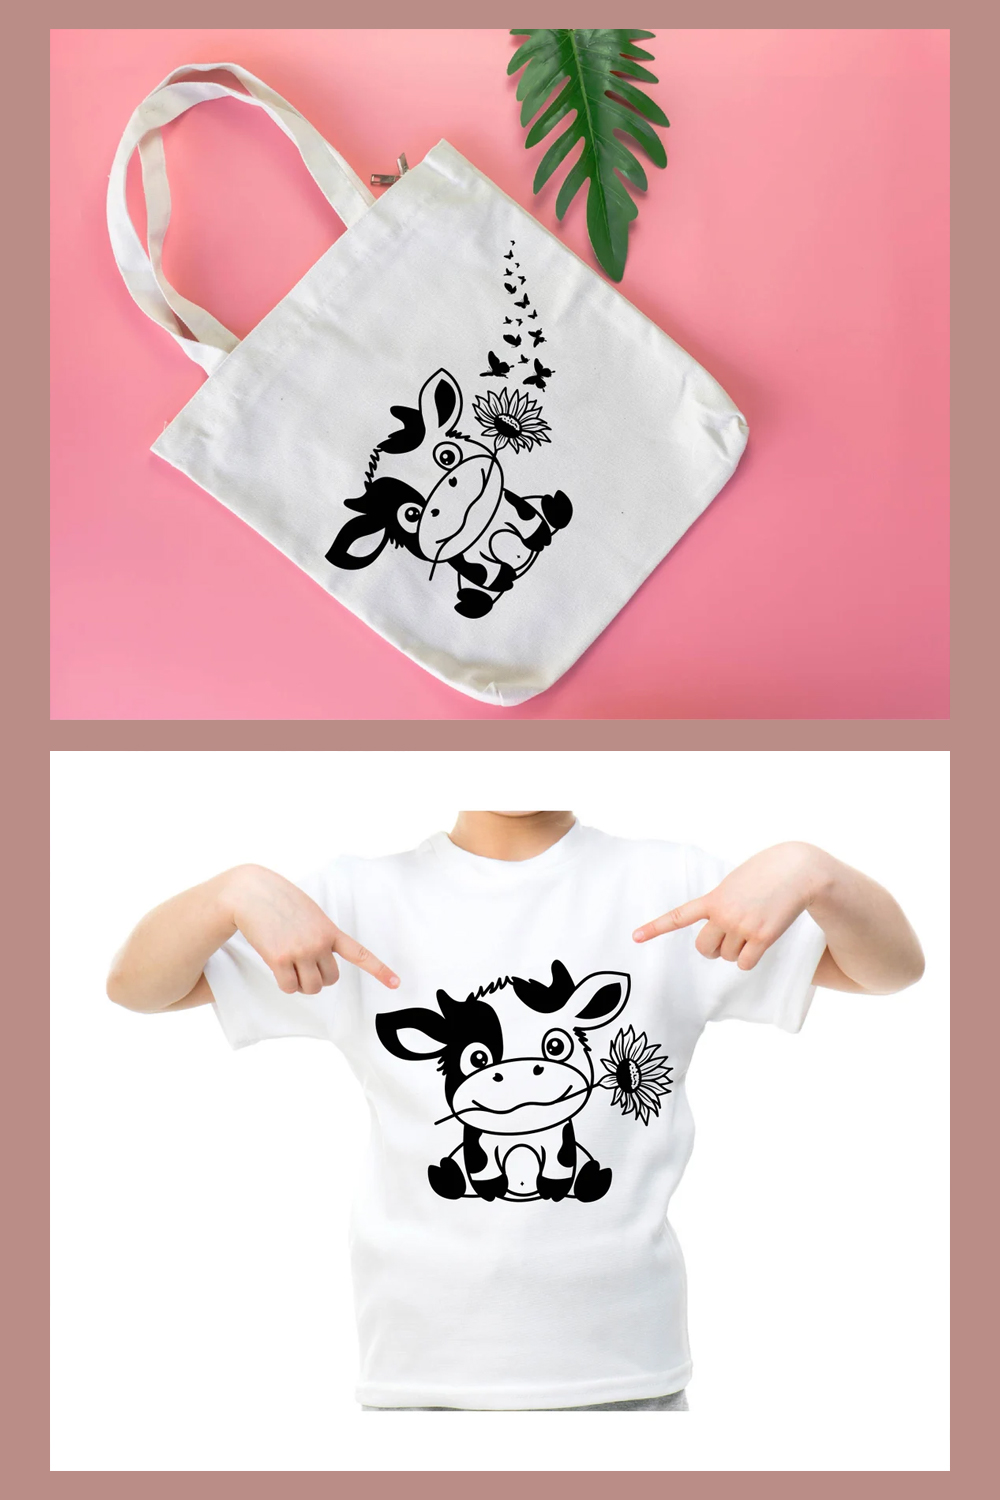 White bag with a black and white cow on it.